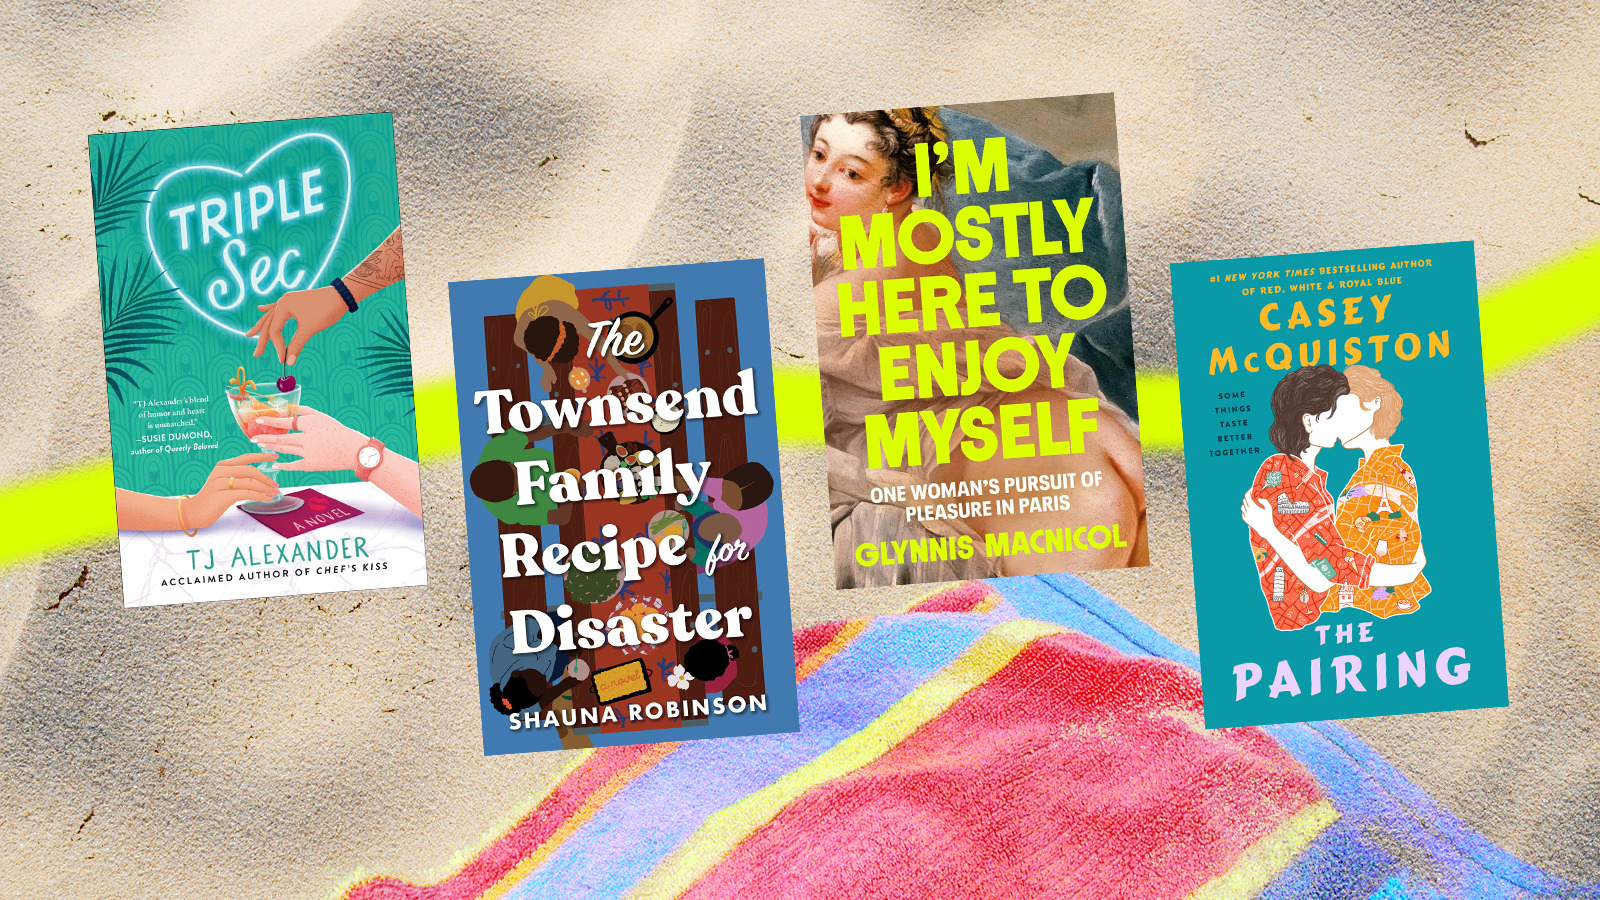 a photo collage of book covers, all summer 2024 releases. from left to right, it features tj alexander’s triple sec, shauna robinson’s the townsend family recipe for disaster, glynnis macnicol’s i’m mostly here to enjoy myself, and casey mcquiston’s the pairing